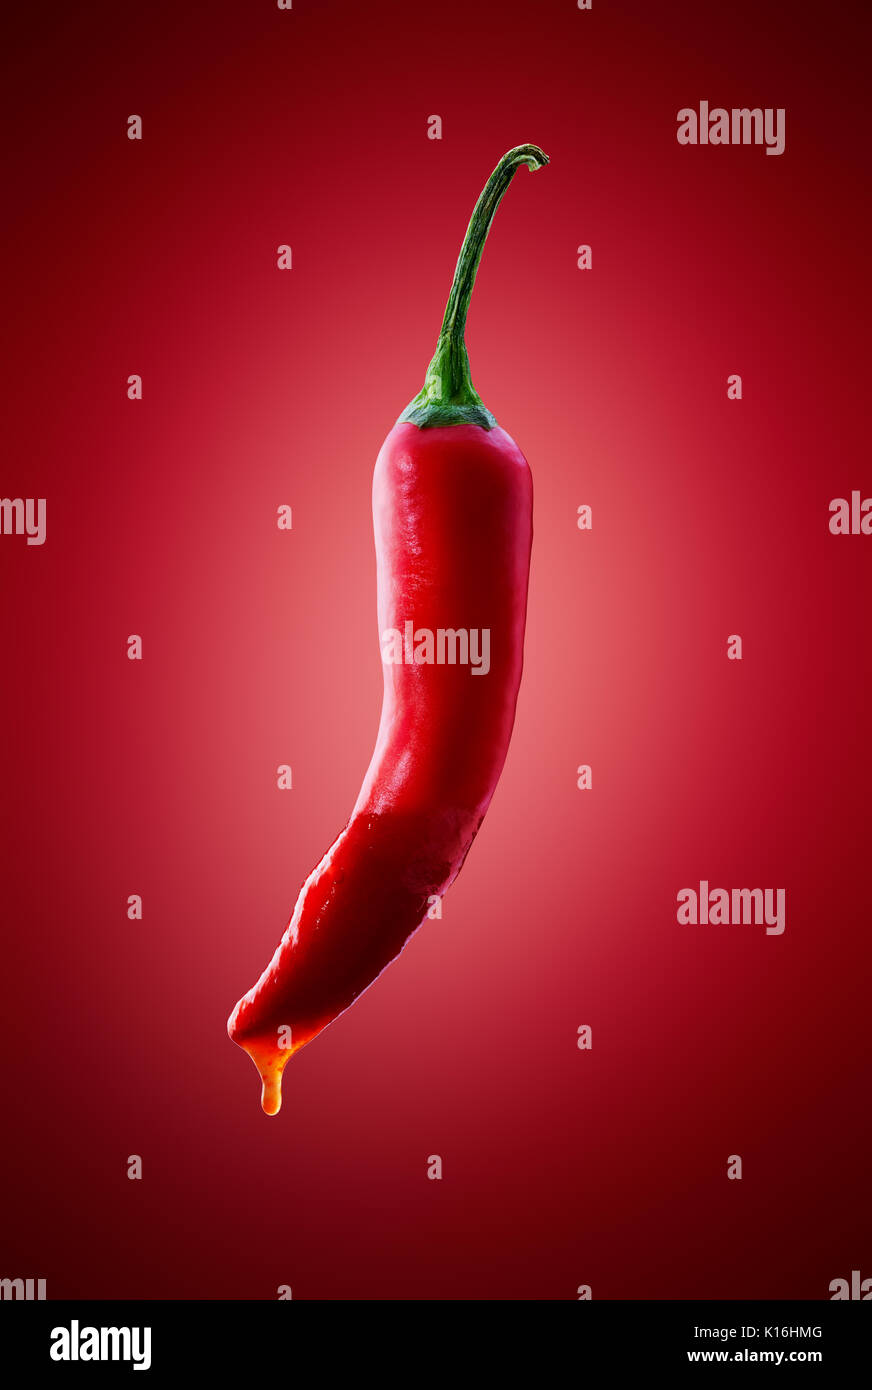 Red chili pepper with hot chili sauce drips on gradient background Stock Photo